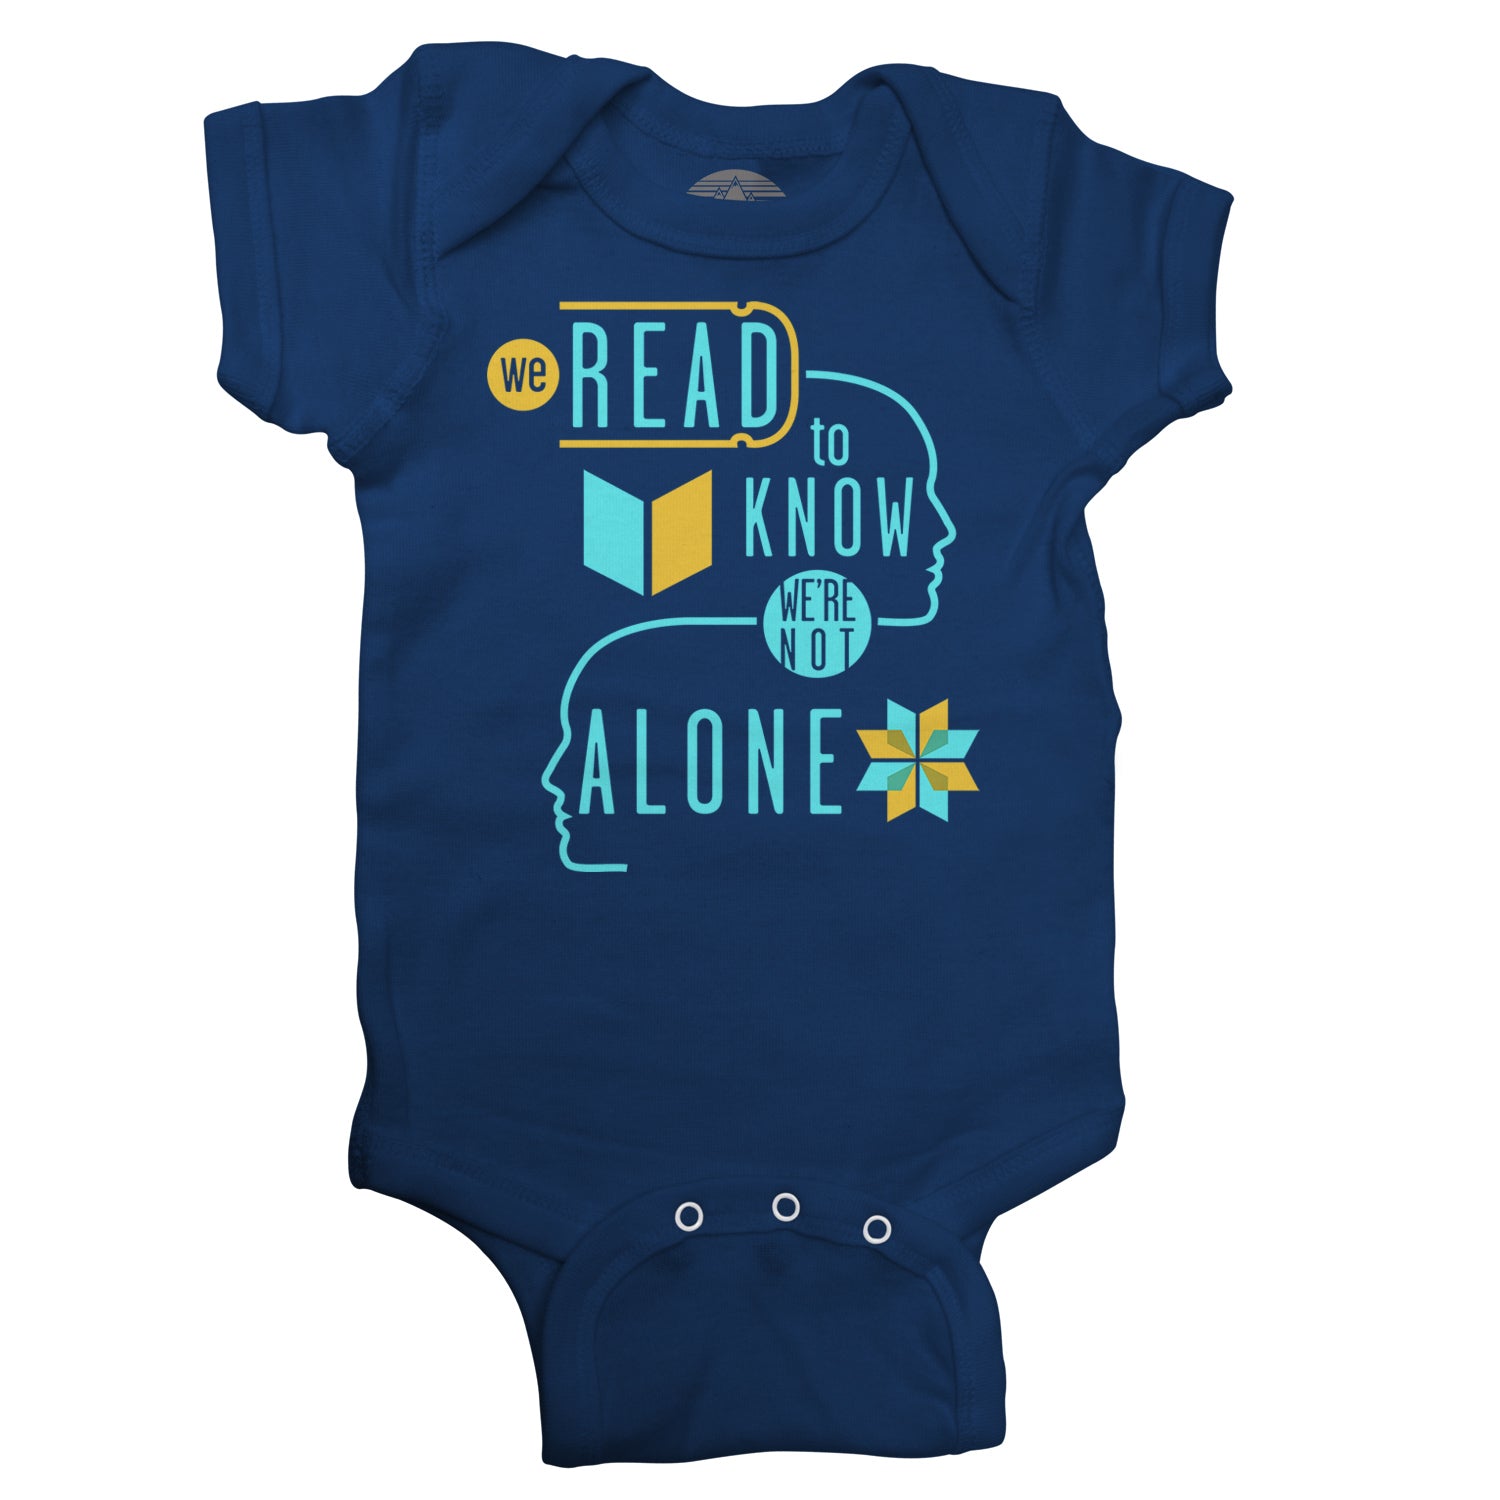 We Read to Know We are Not Alone Infant Bodysuit - Unisex Fit